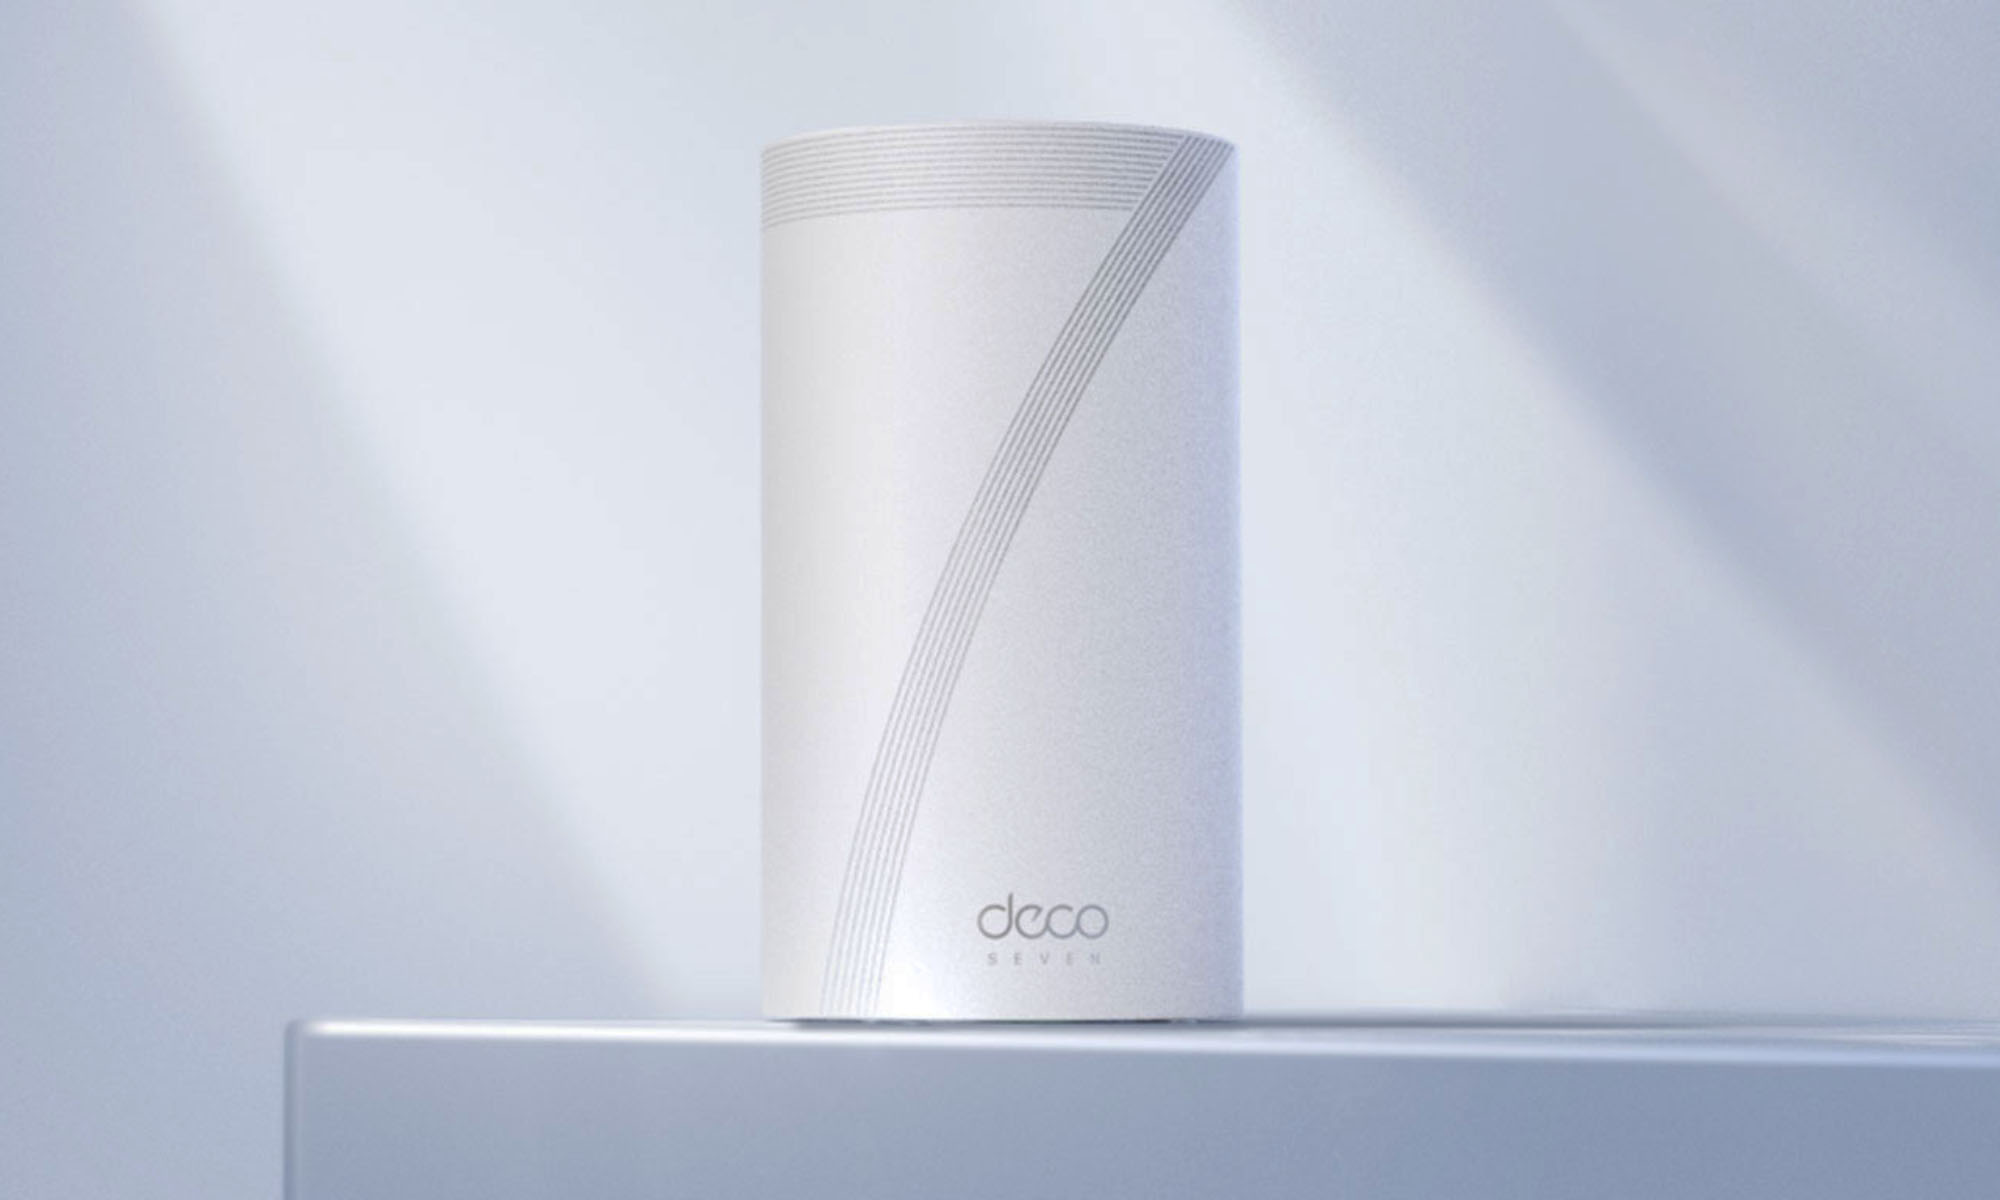 tp-link deco be95